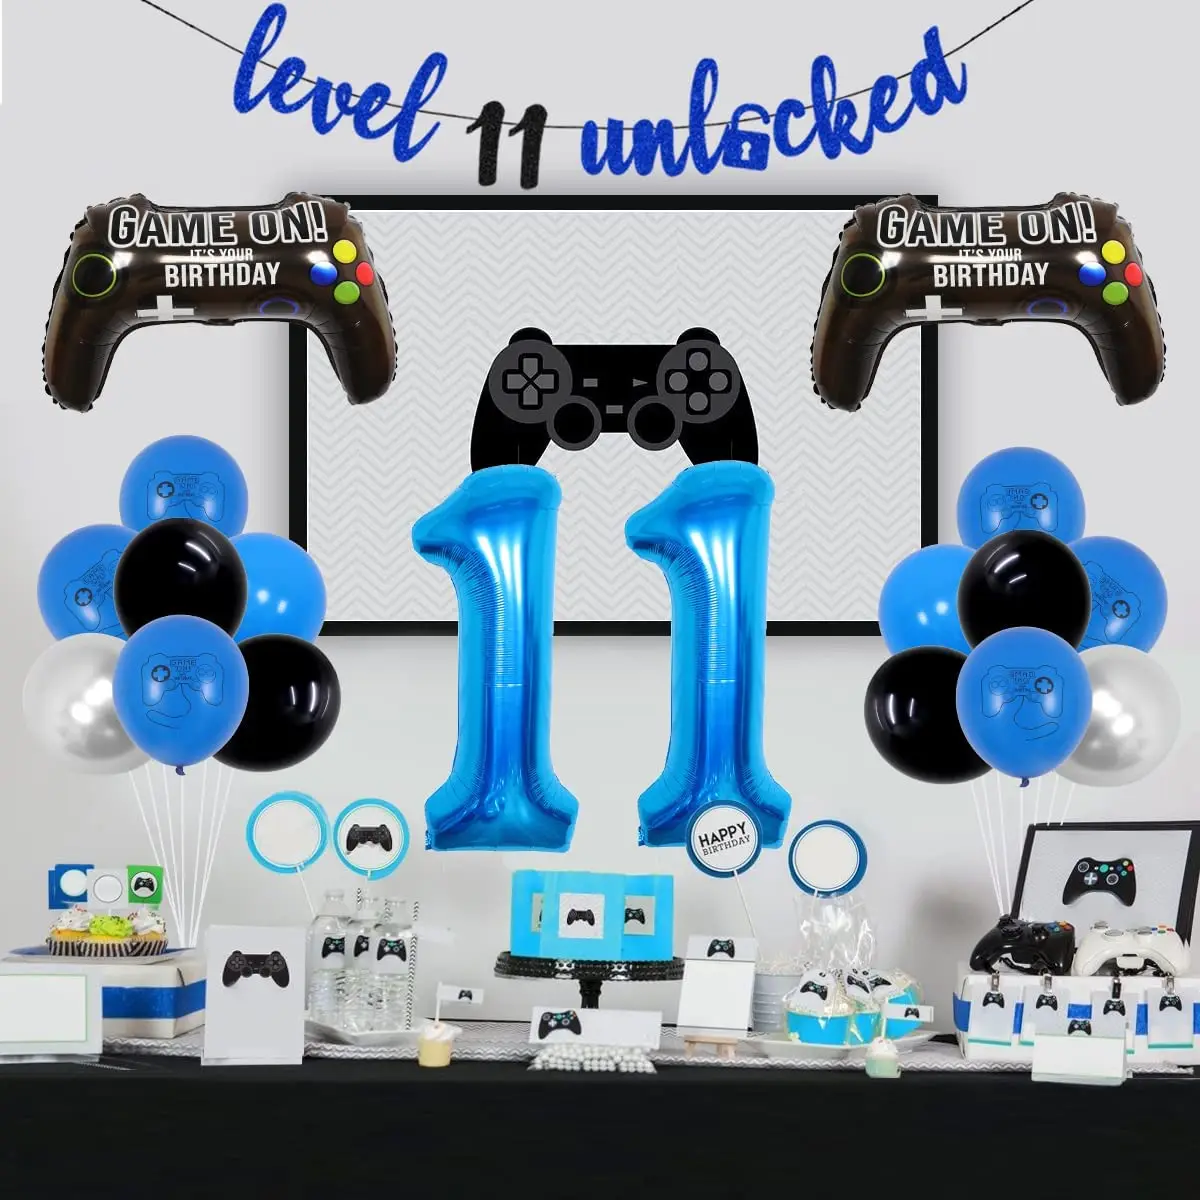  Level 11 Unlocked Cake Topper, Video Game Cake Topper, Game  Controller Cake Topper for 11th Birthday Party Decoration : Grocery &  Gourmet Food